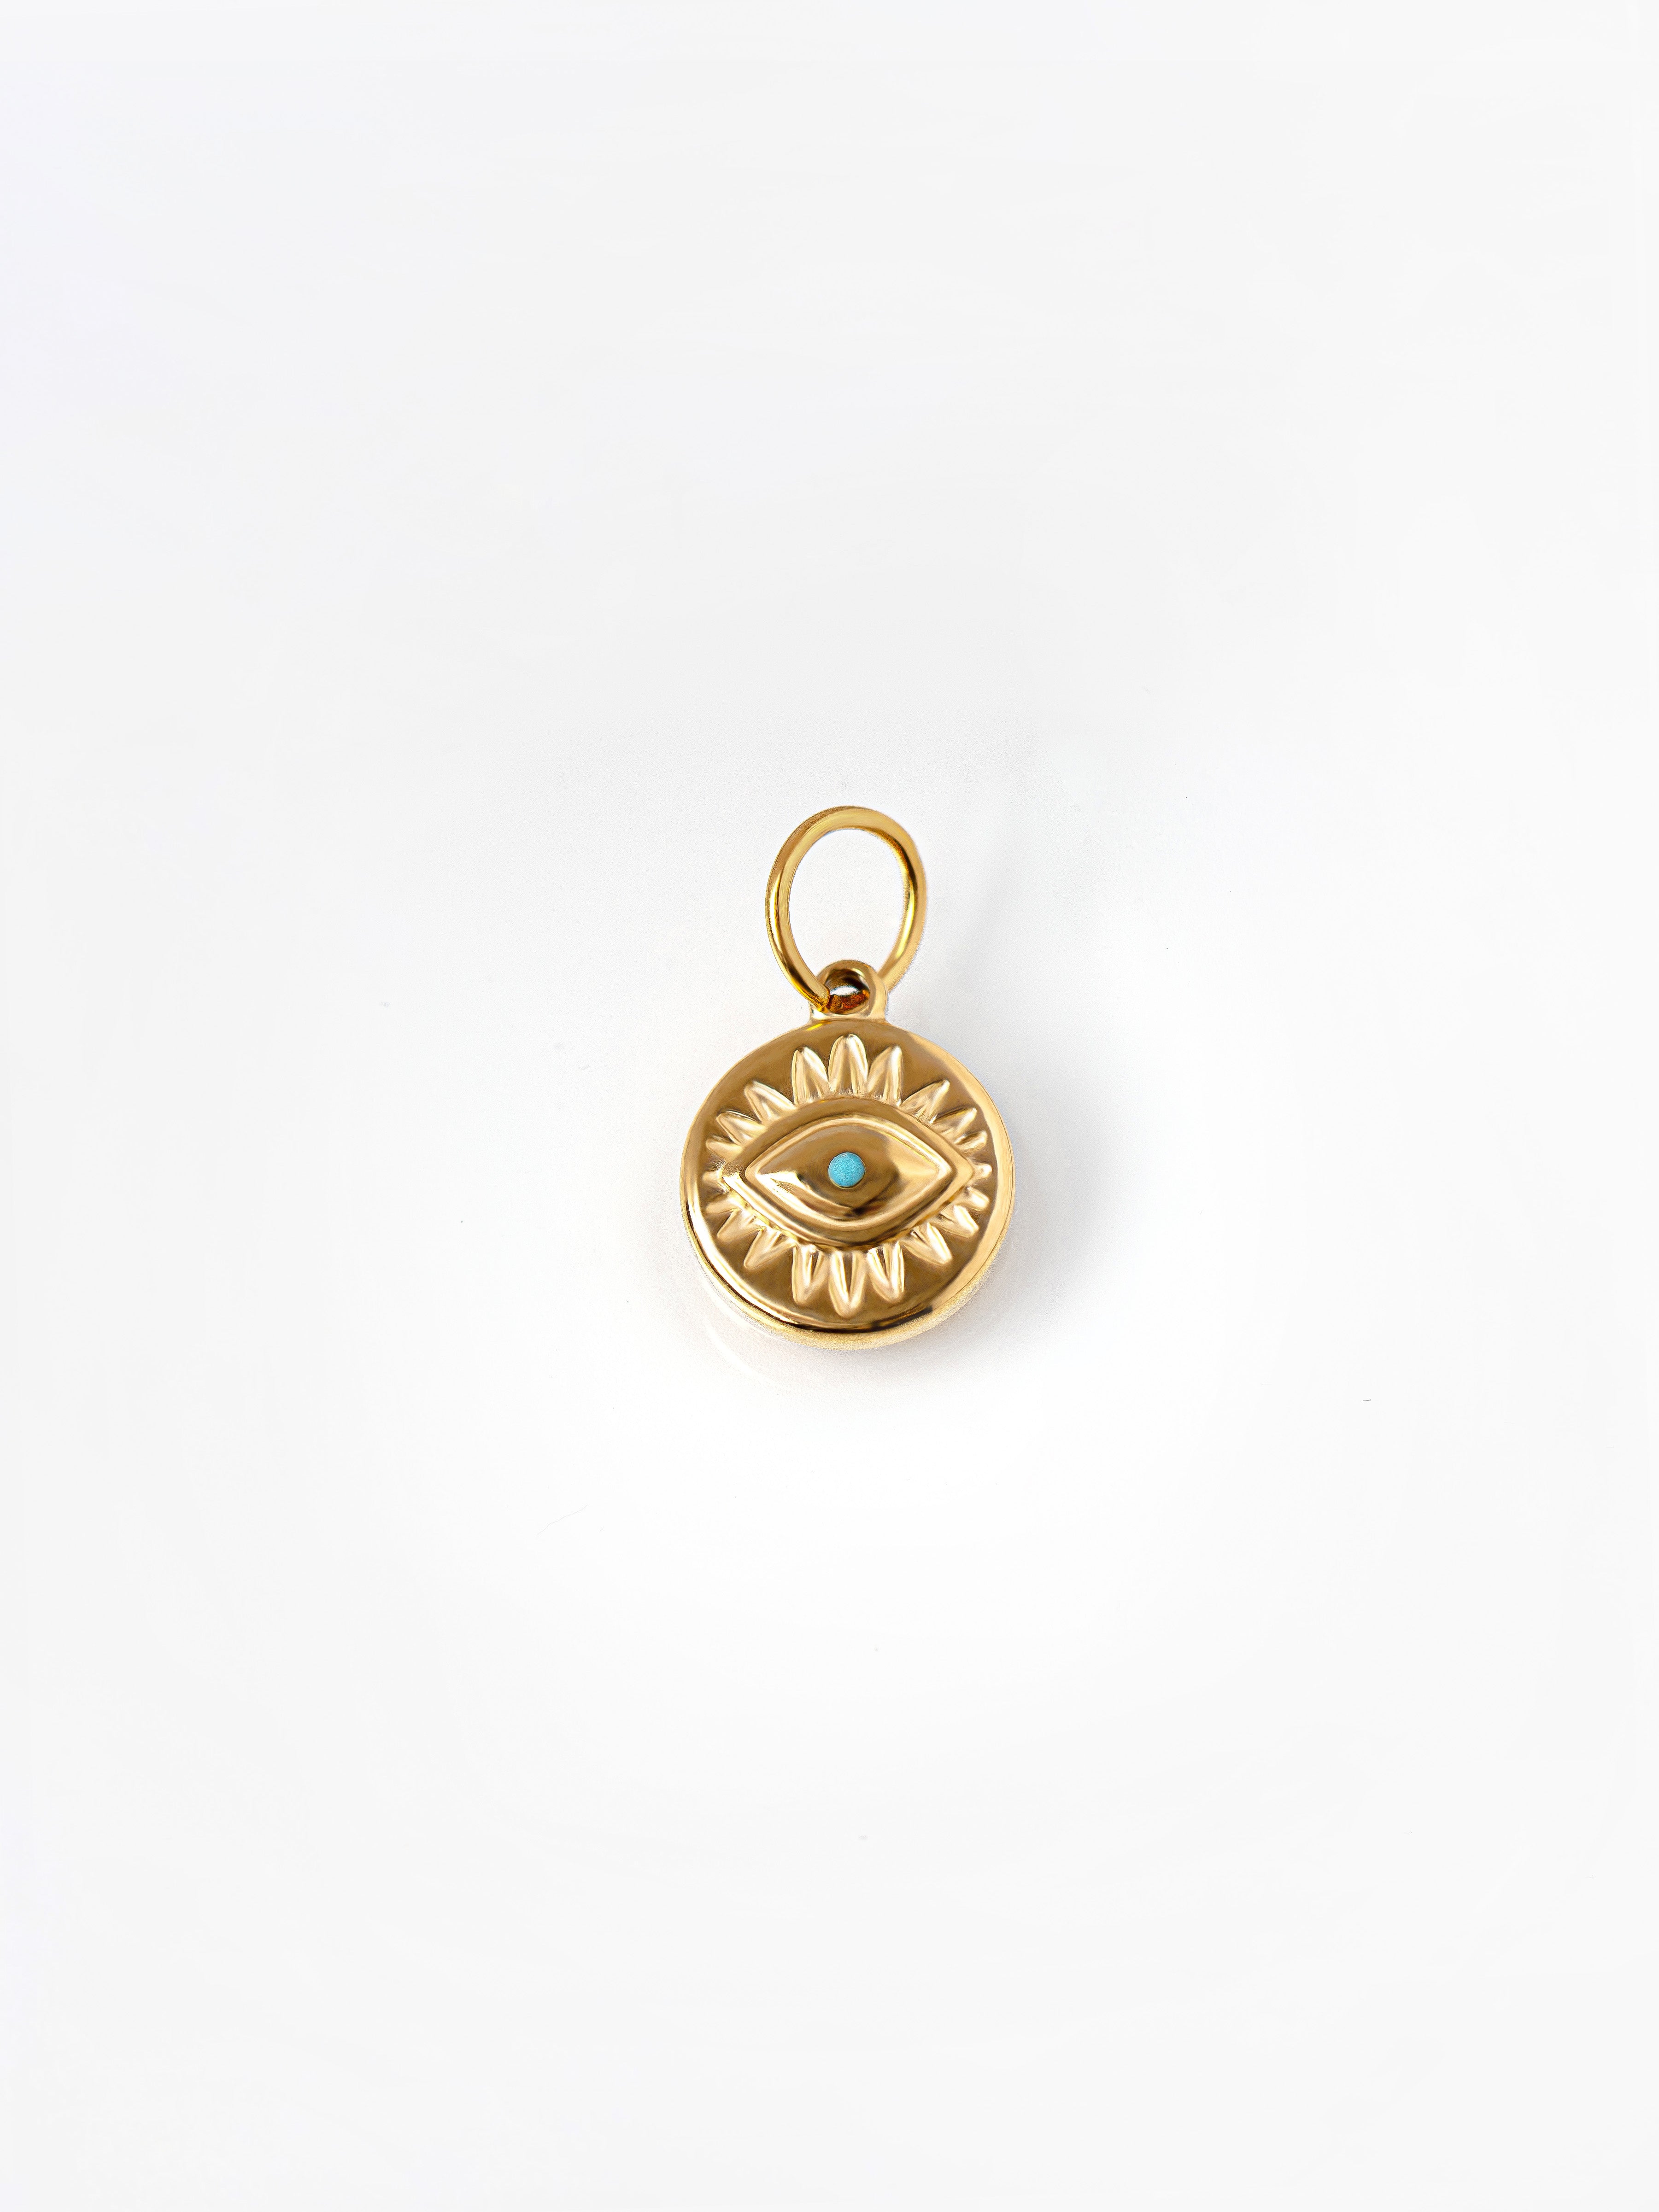 Gold Evil Eye Coin Pendant / Charm With Turquoise Stone